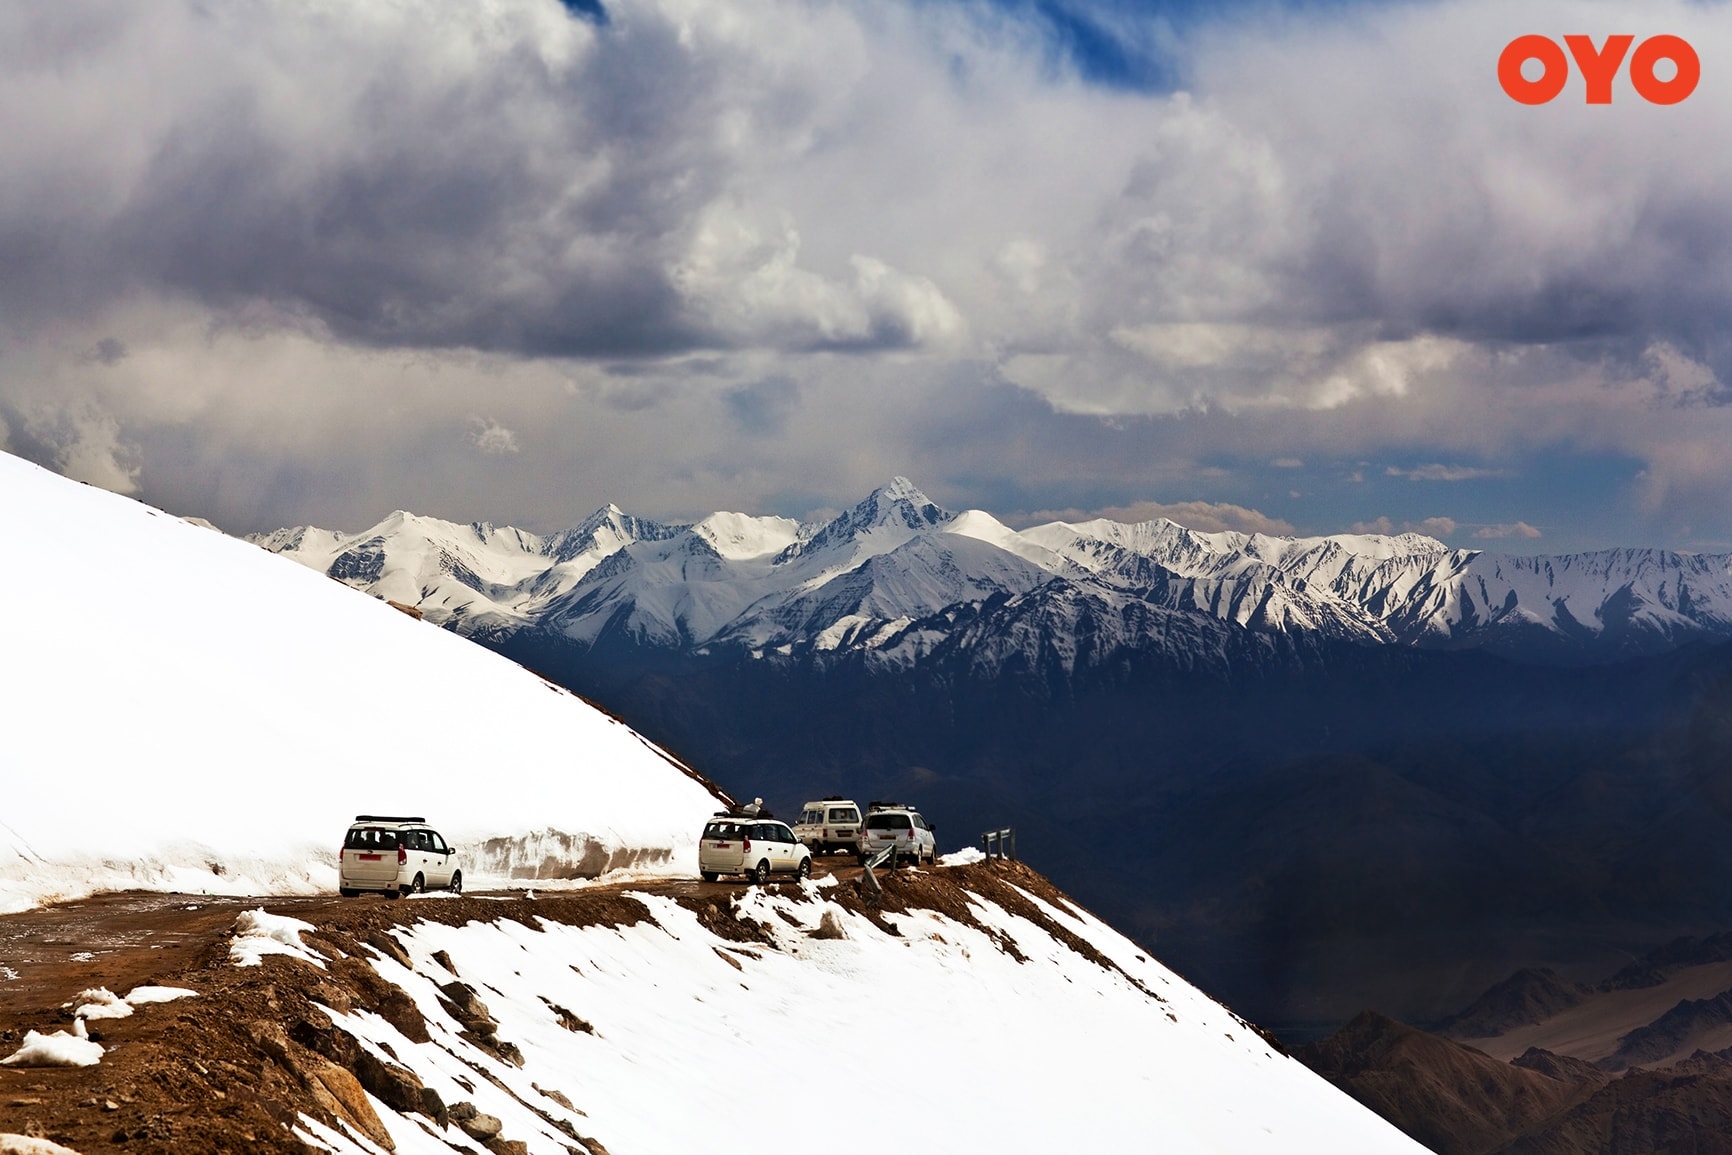 Manali - one of the best places to see snowfall in winter